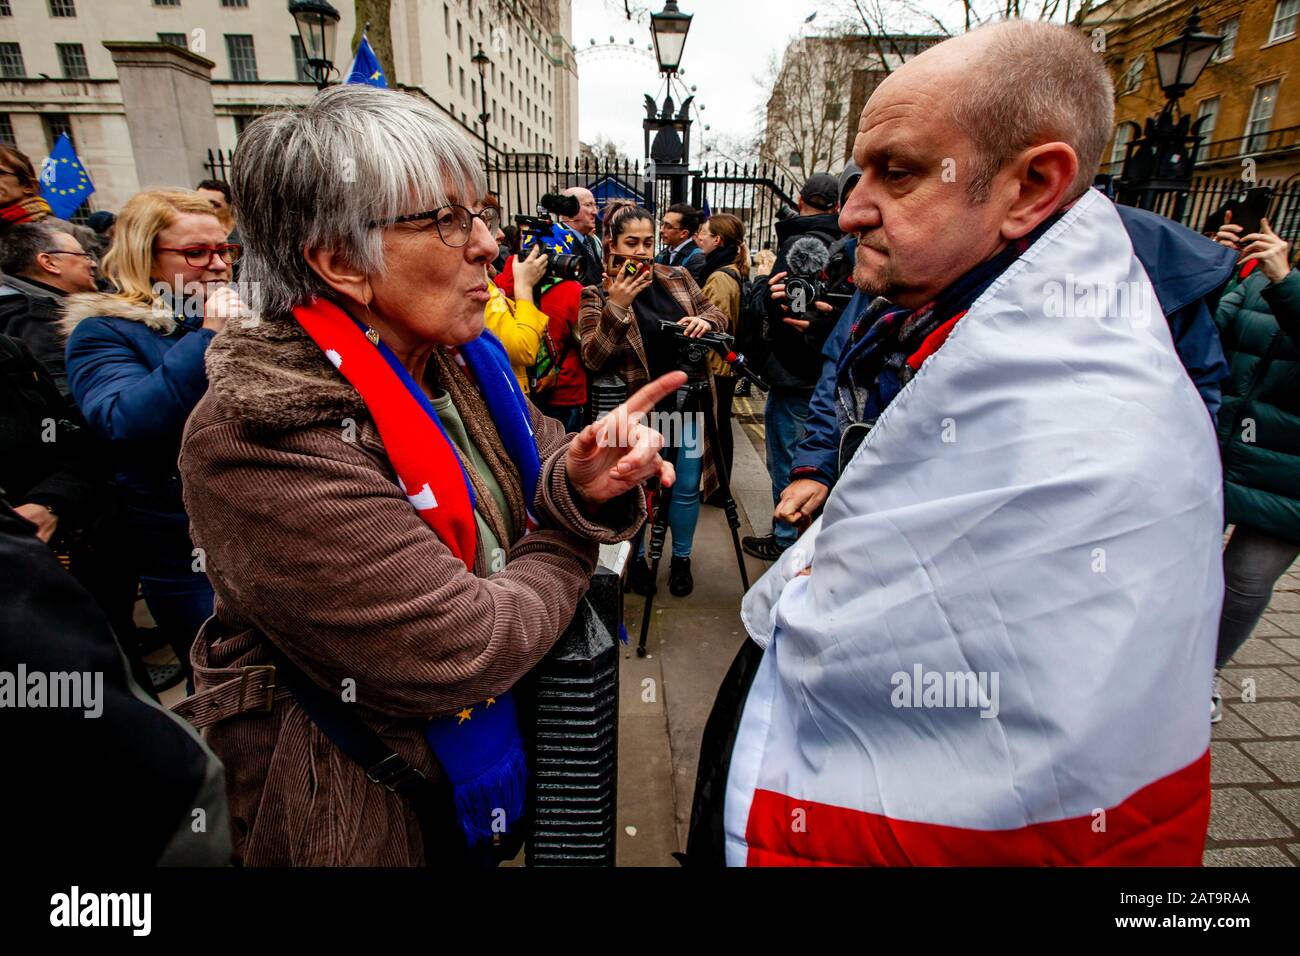 London, UK. 31st Jan, 2020. A confrontation beween a remainer and Brexit supporter near Parliament Square, London as Brexit supporters gather to celebrate Britain leaving the EU. Credit: Grant Rooney/Alamy Live News Stock Photo